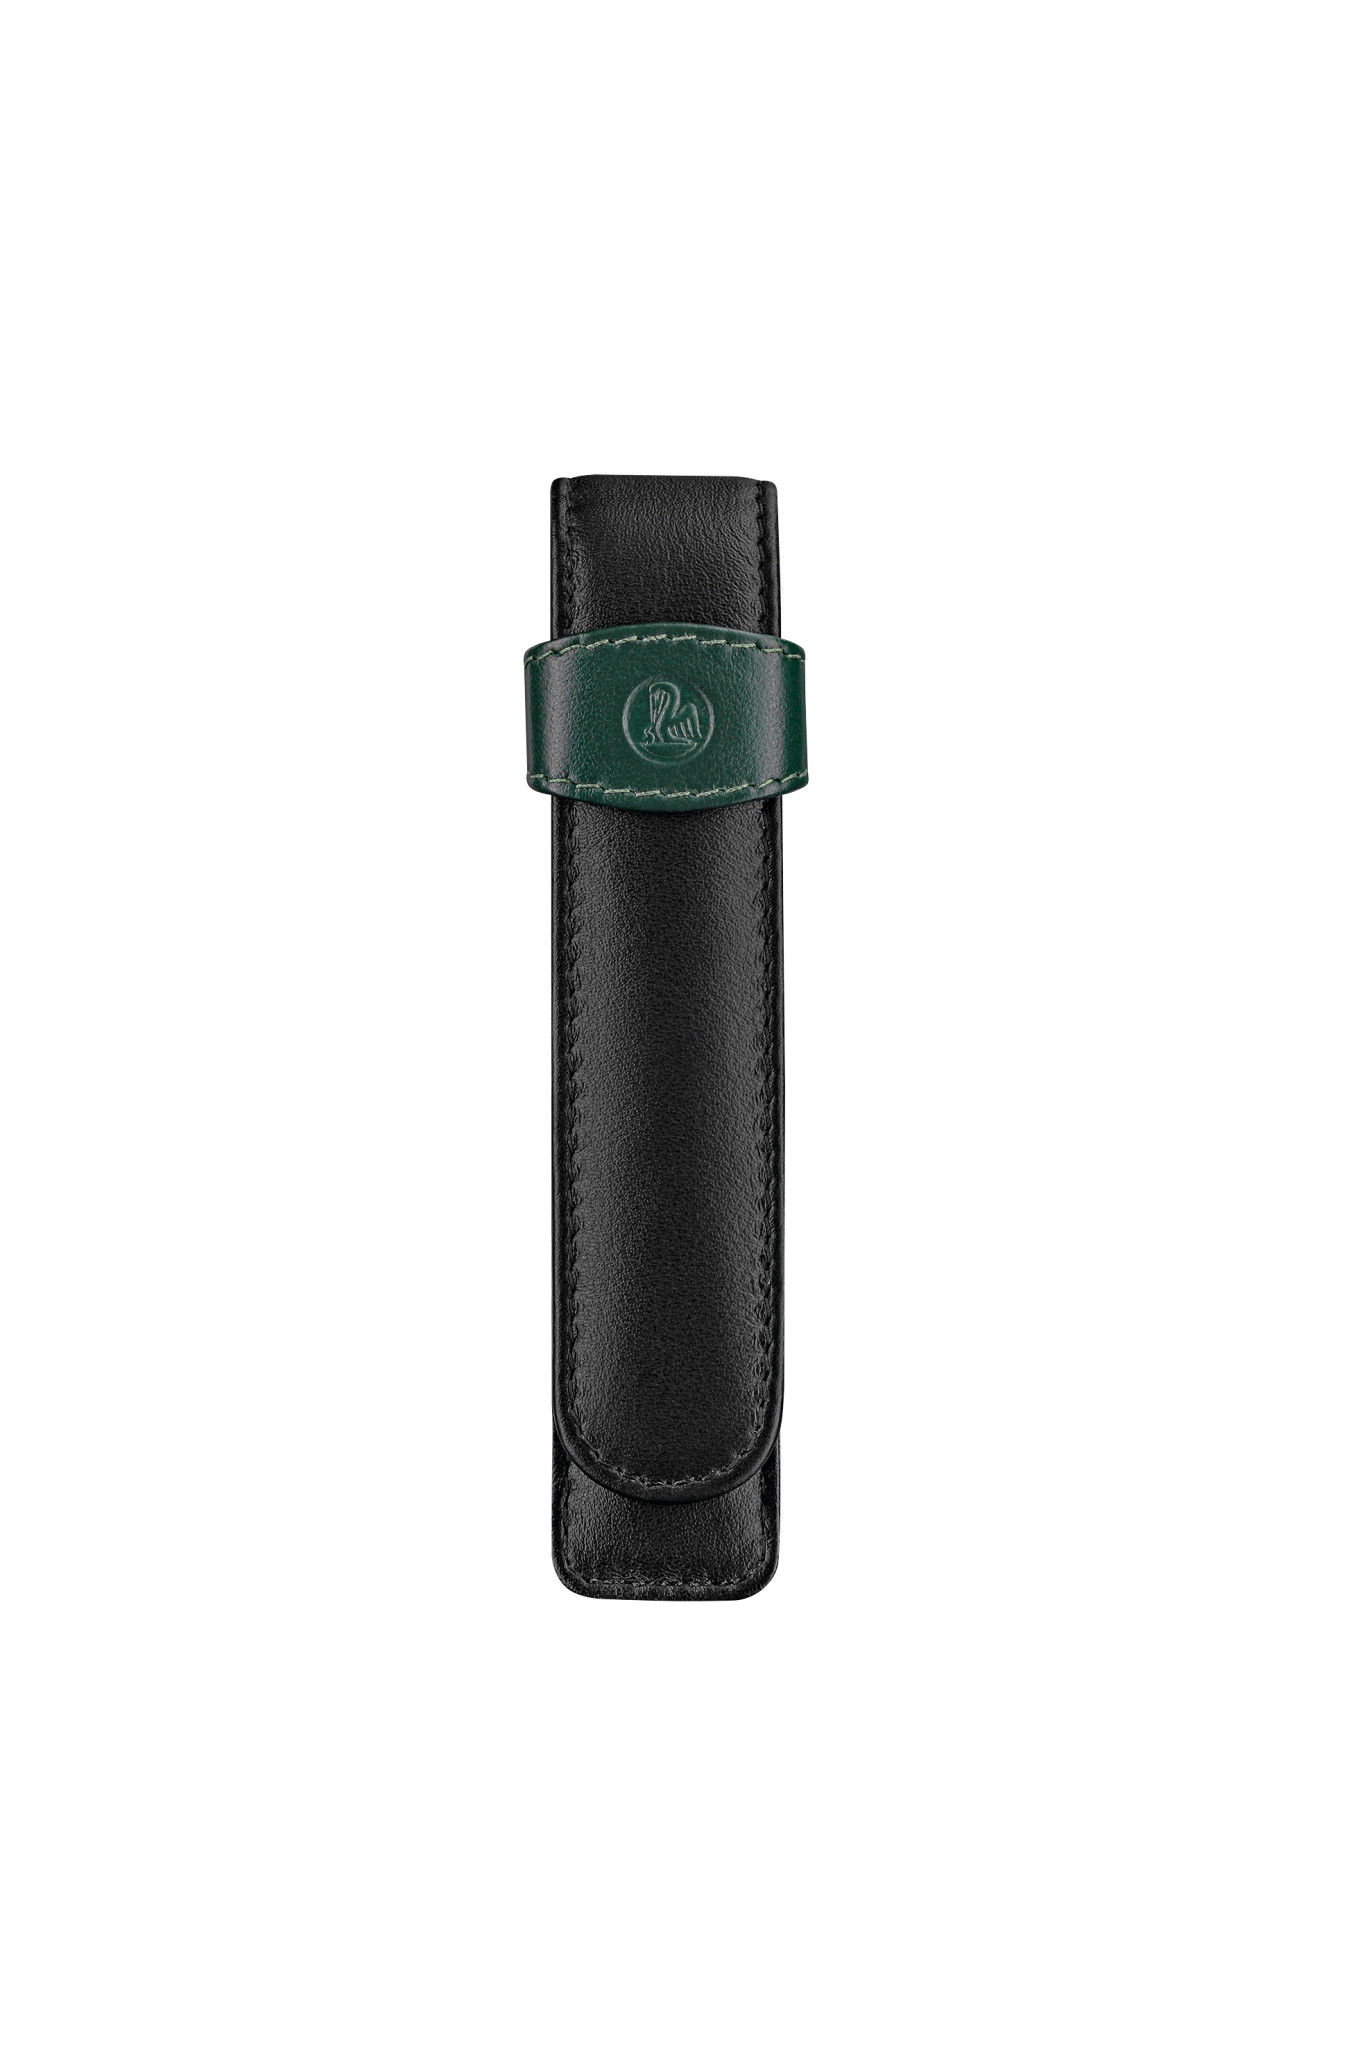 Pelikan Writing Implement Case Made Of Leather TG 12 for a Black-Green Writing Implement